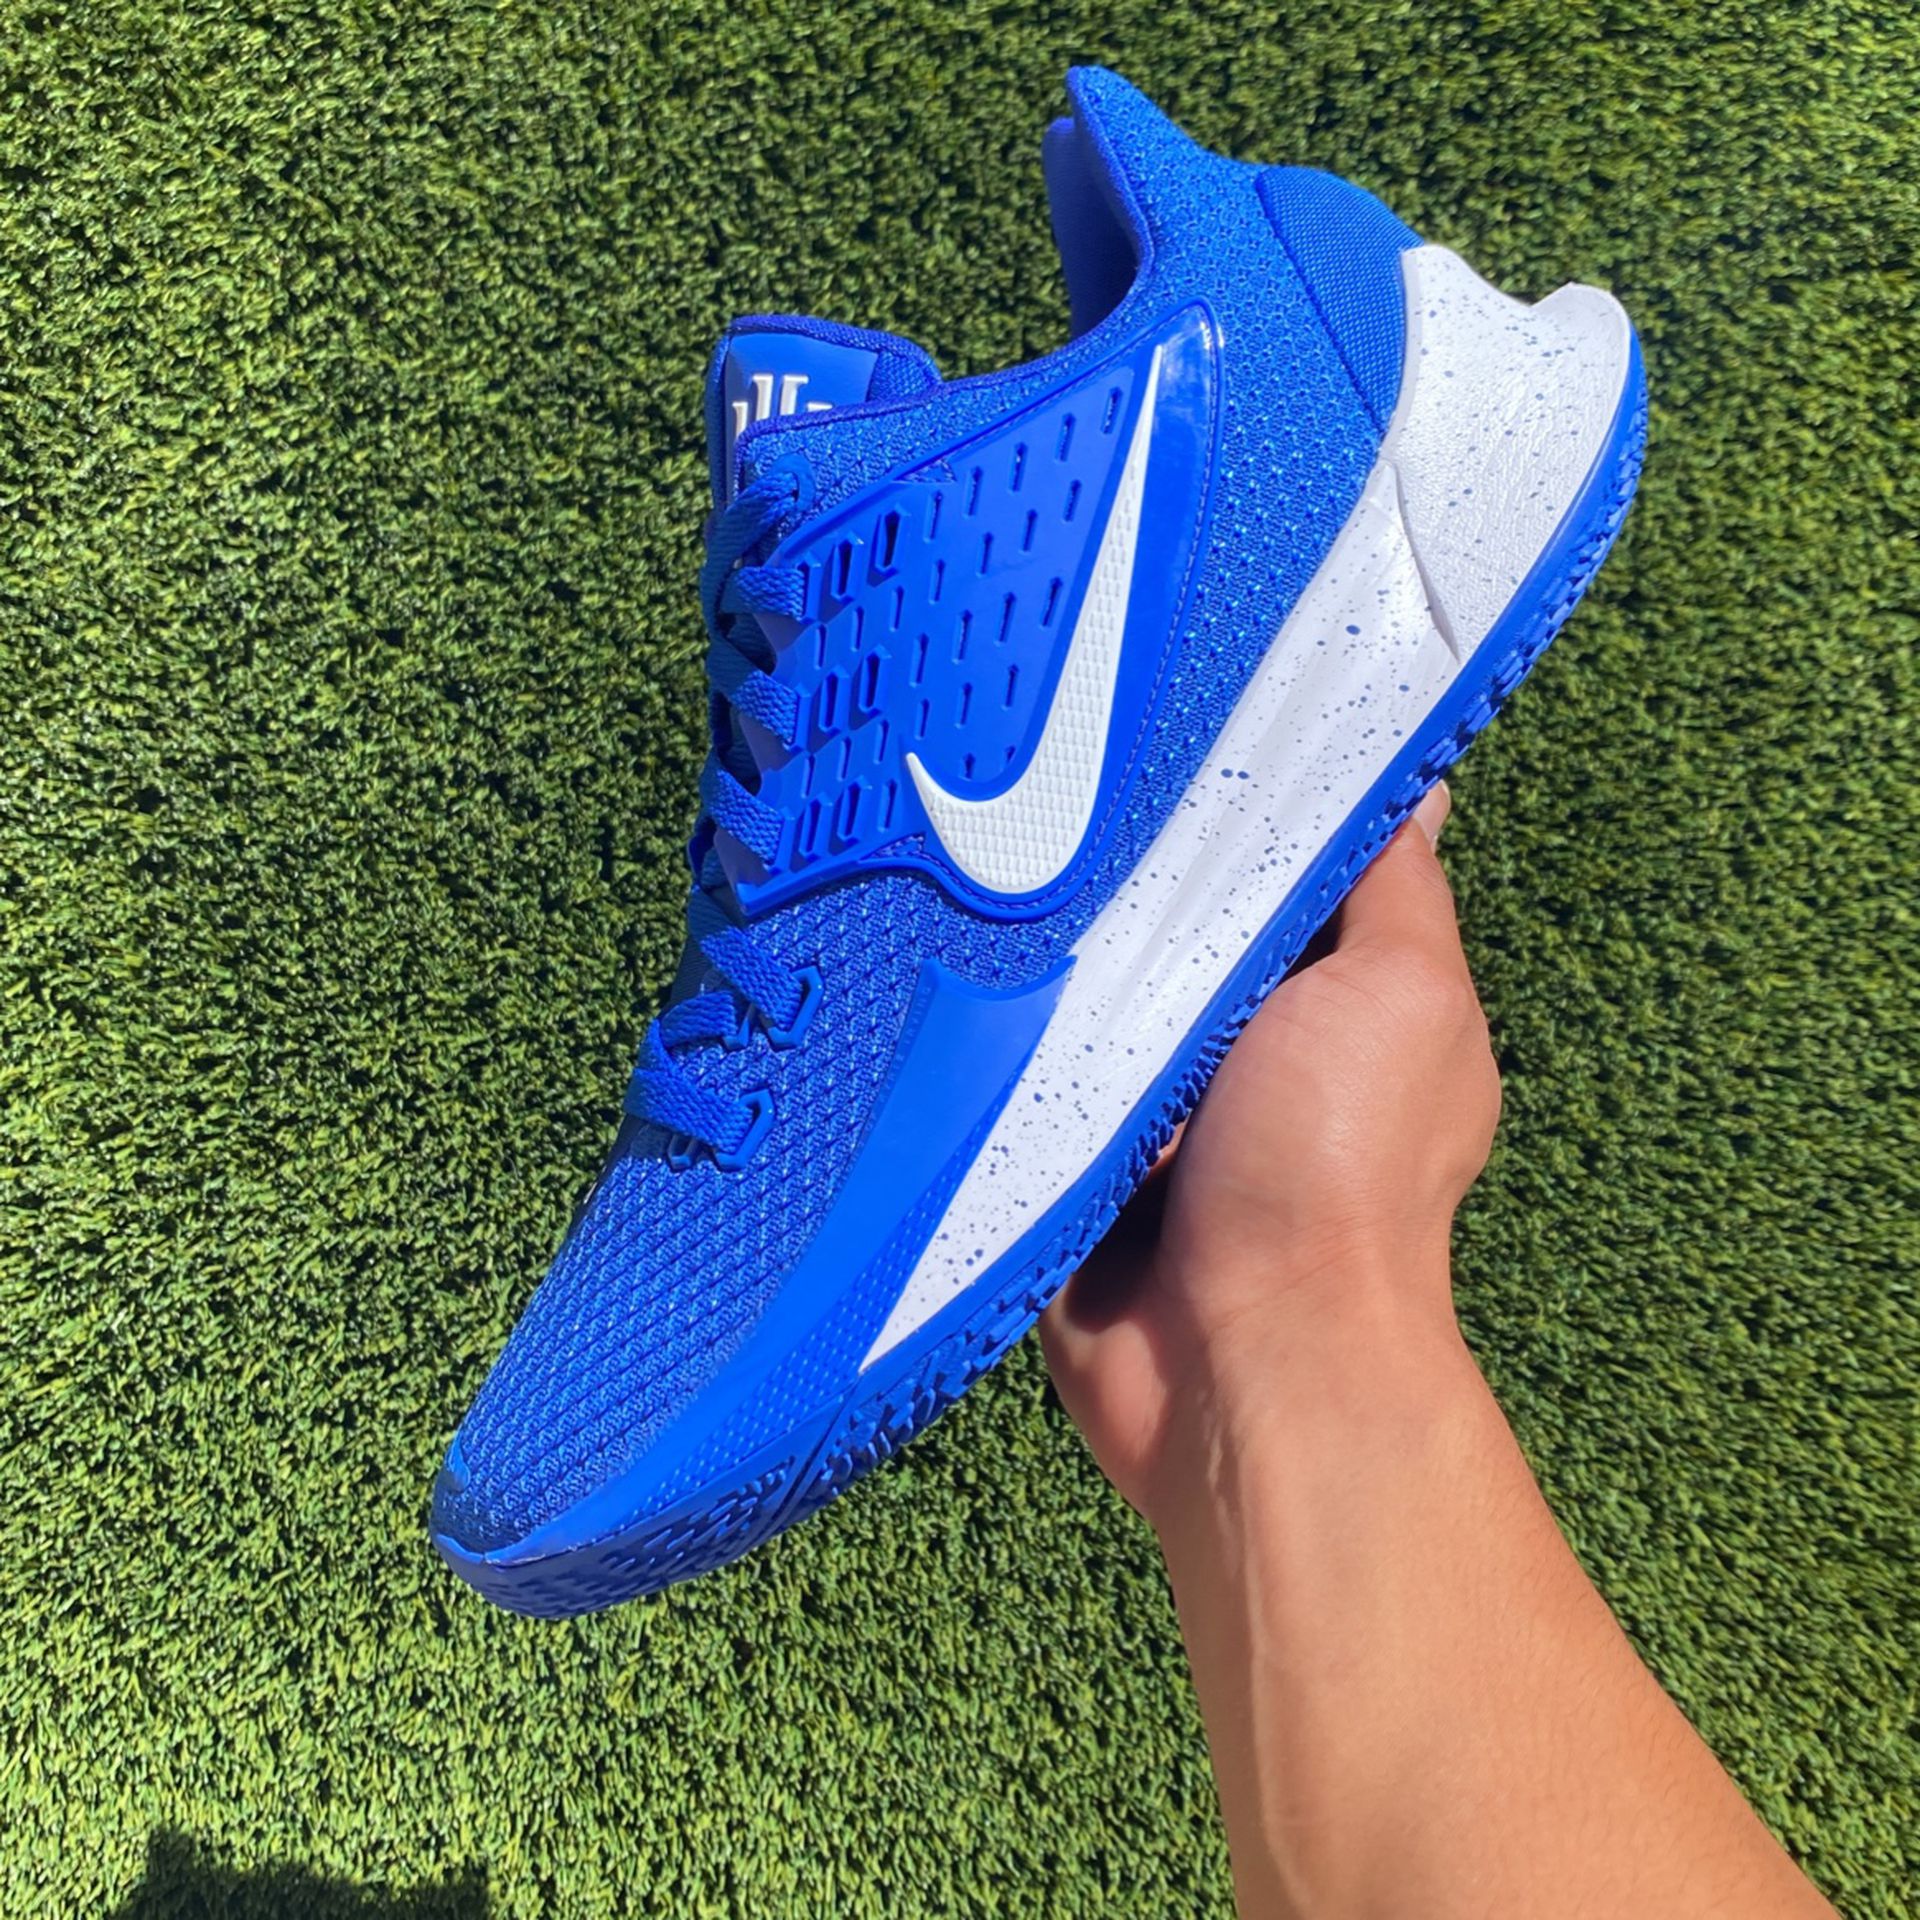 Kyrie Low 2 TB ‘Racer Blue’ Size 12